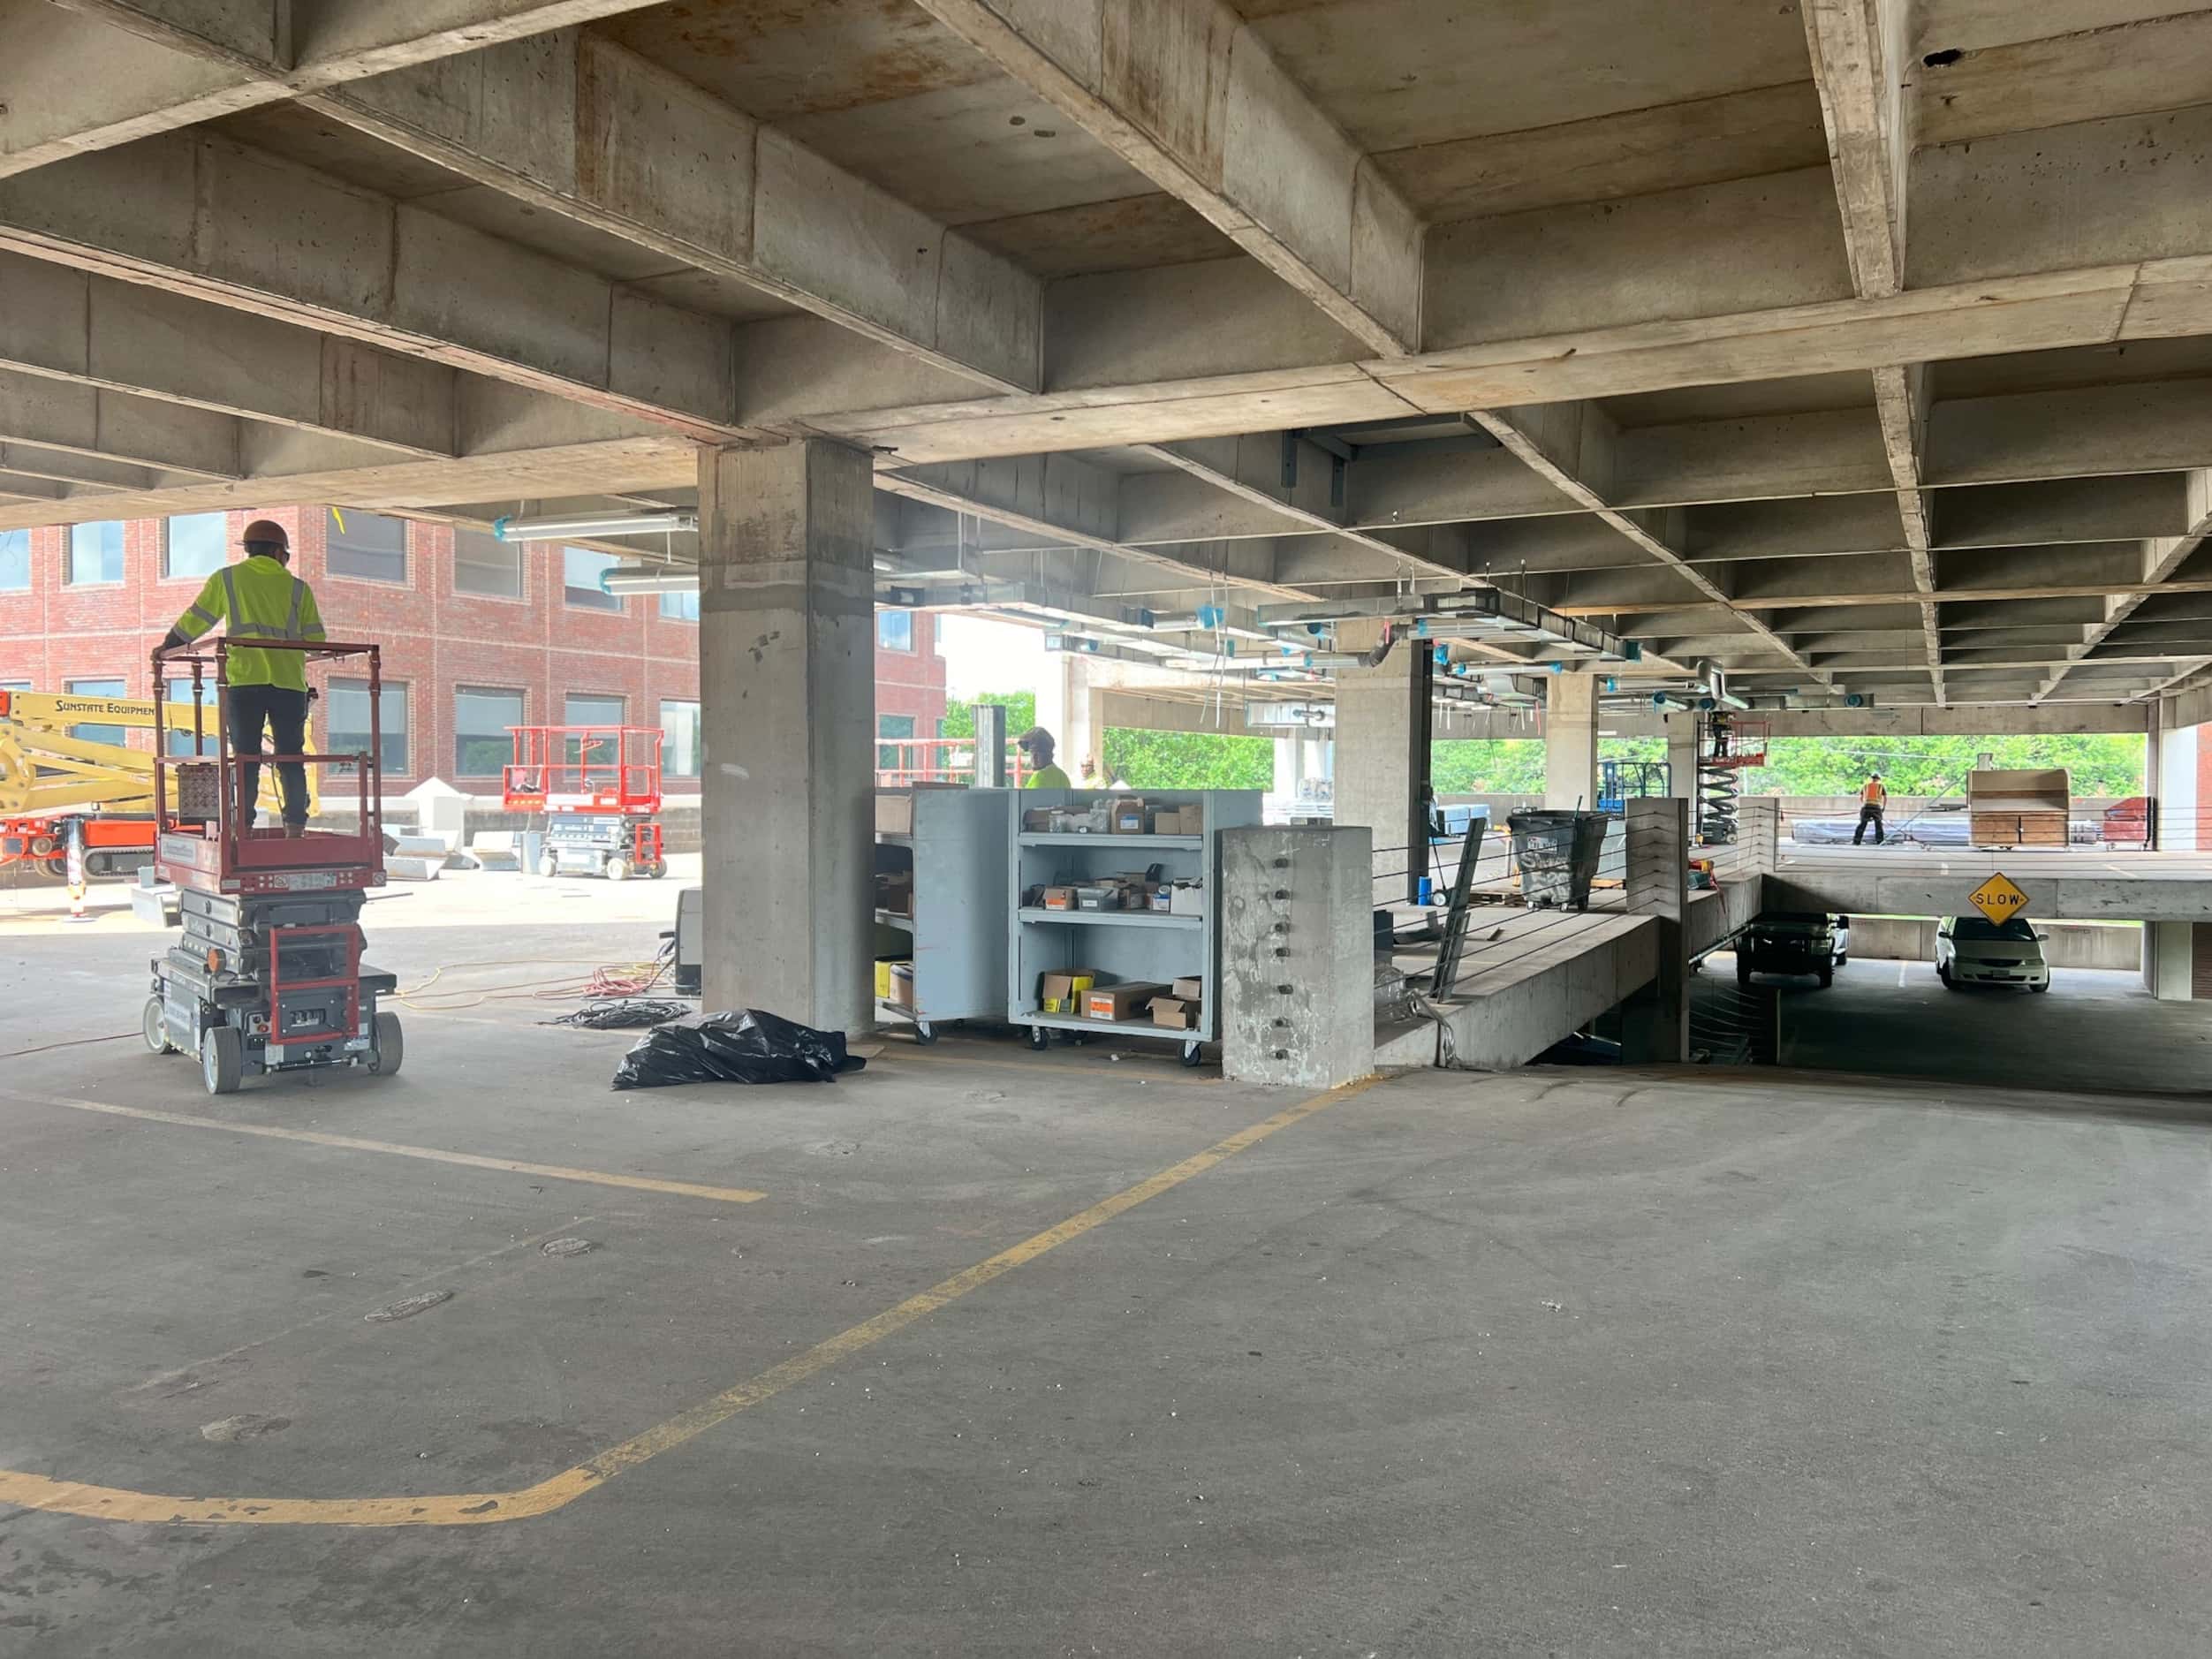 The top level of the parking garage is being rethought as an athletic court and...